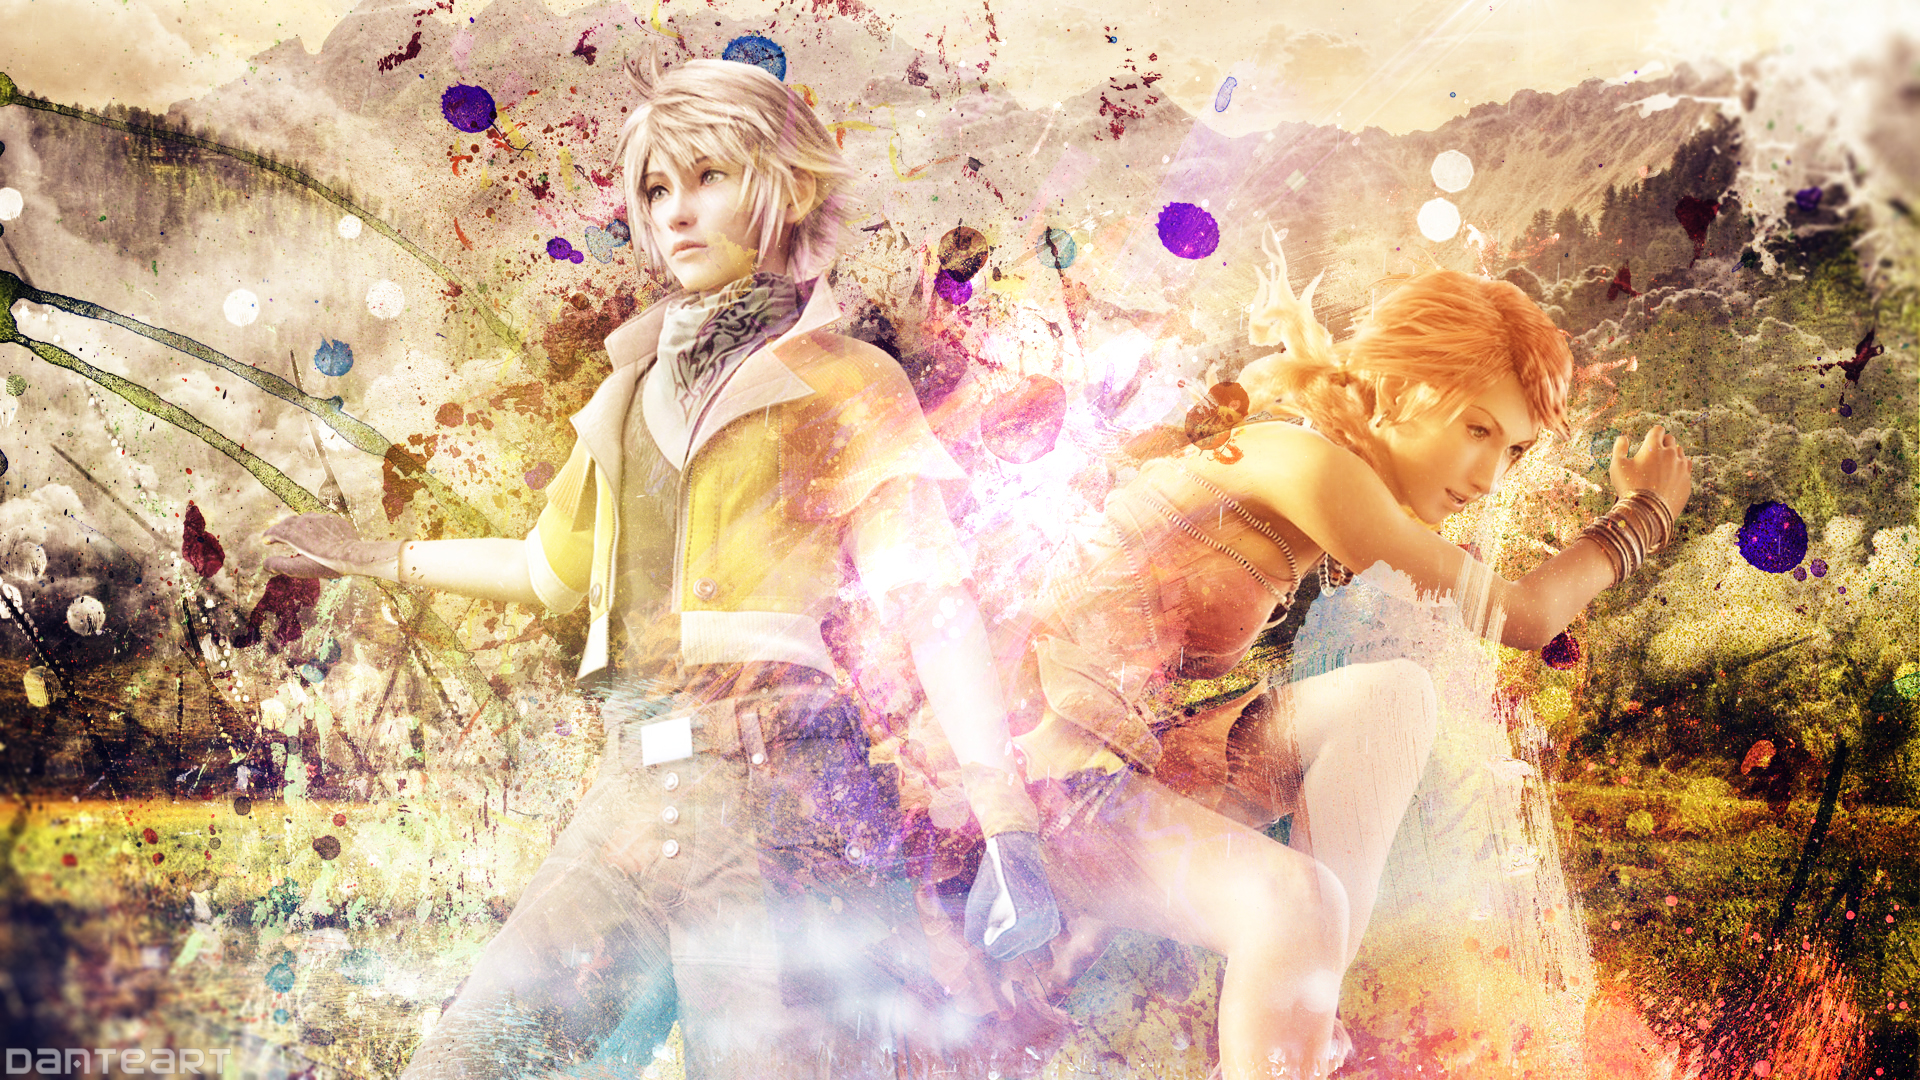 Final Fantasy Xiii Hope And Vanille Wallpaper By